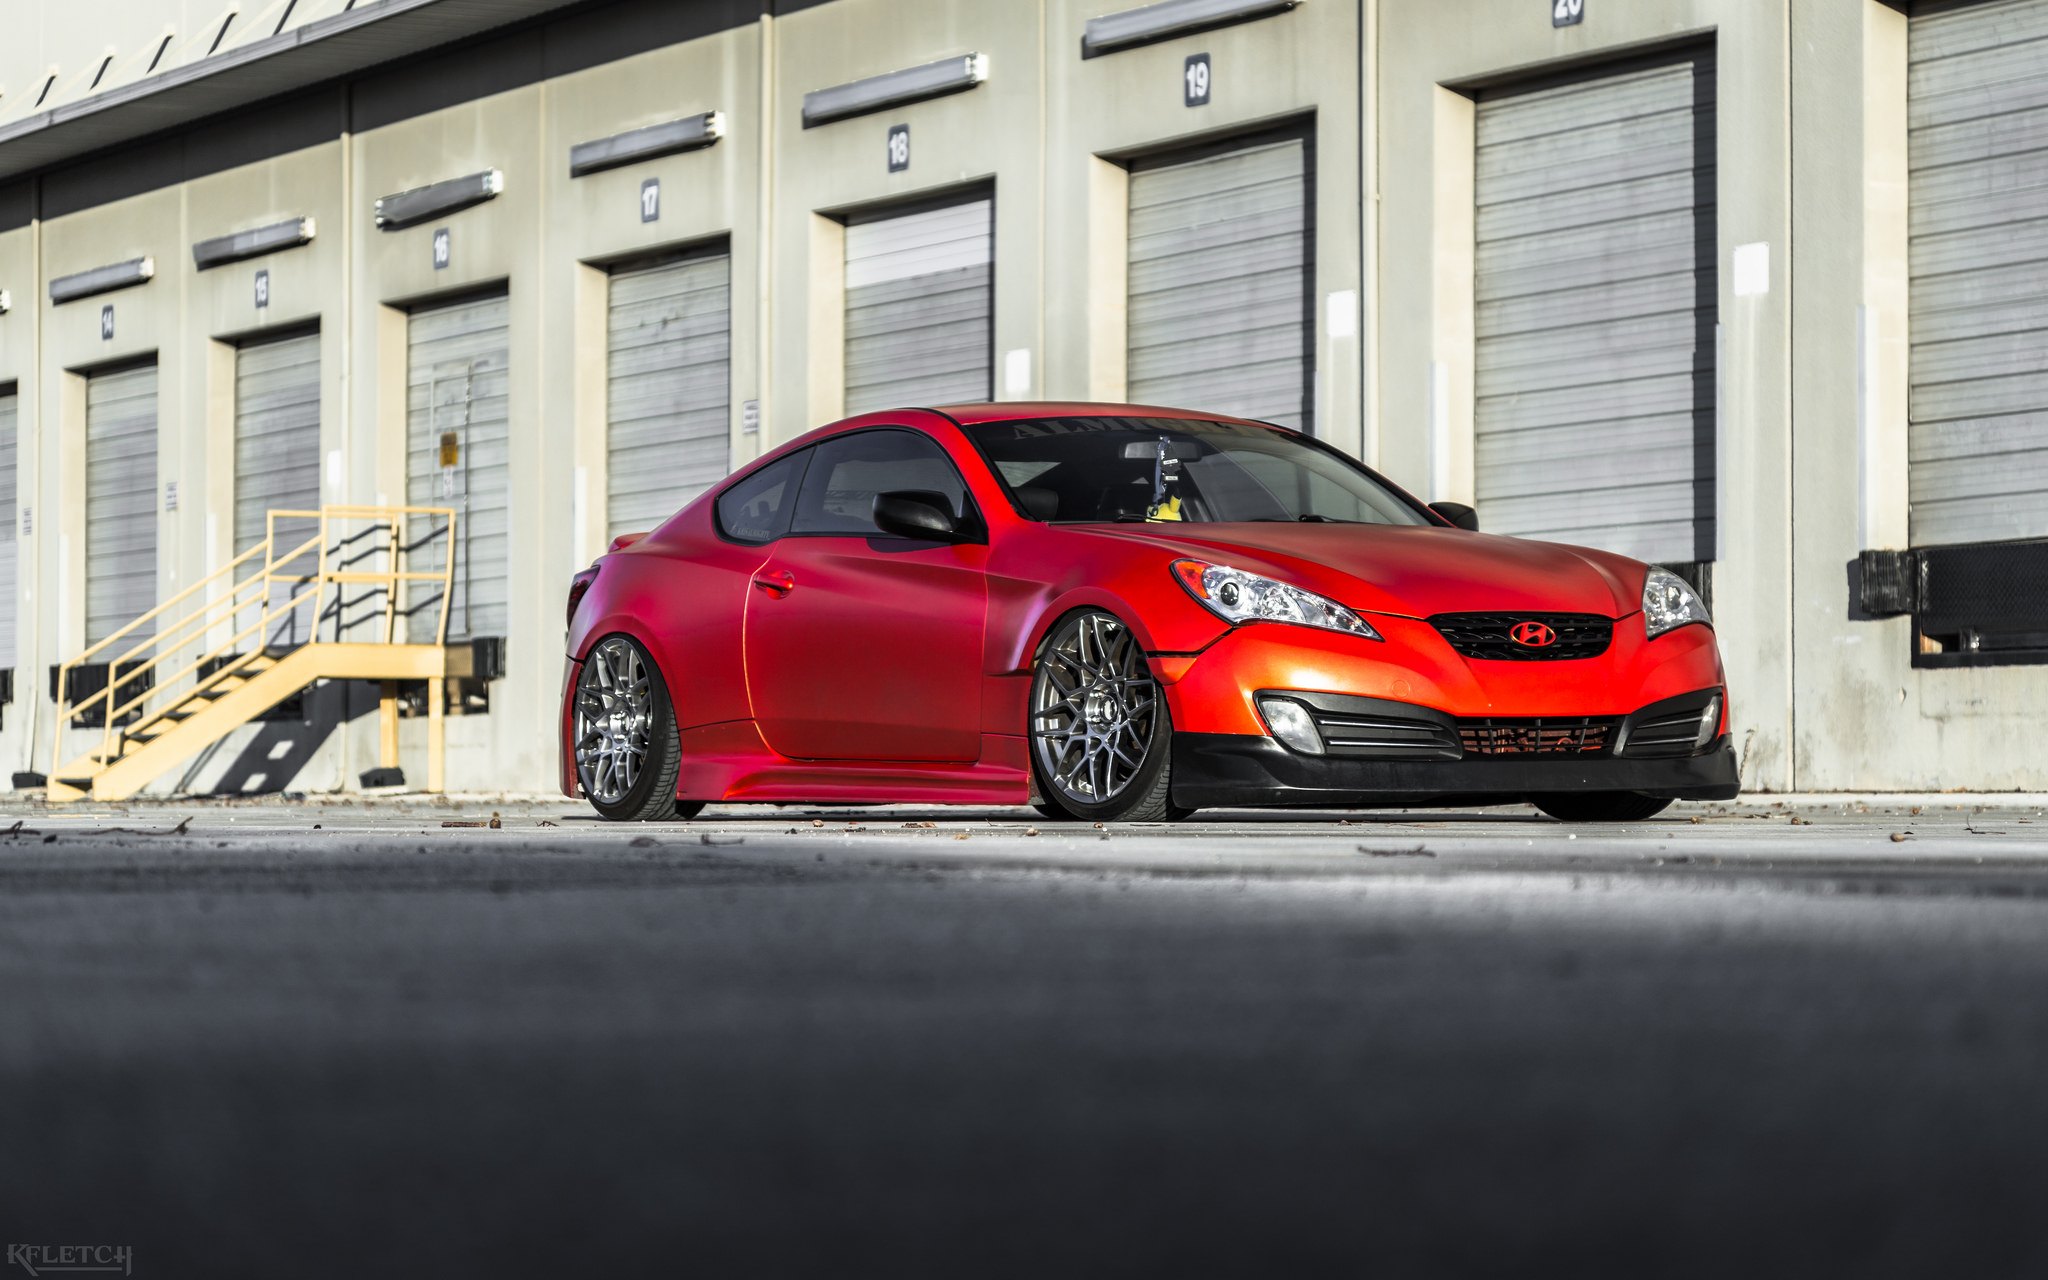 Custom Rear Diffuser on Red Hyundai Genesis Coupe - Photo by kyle Fletcher